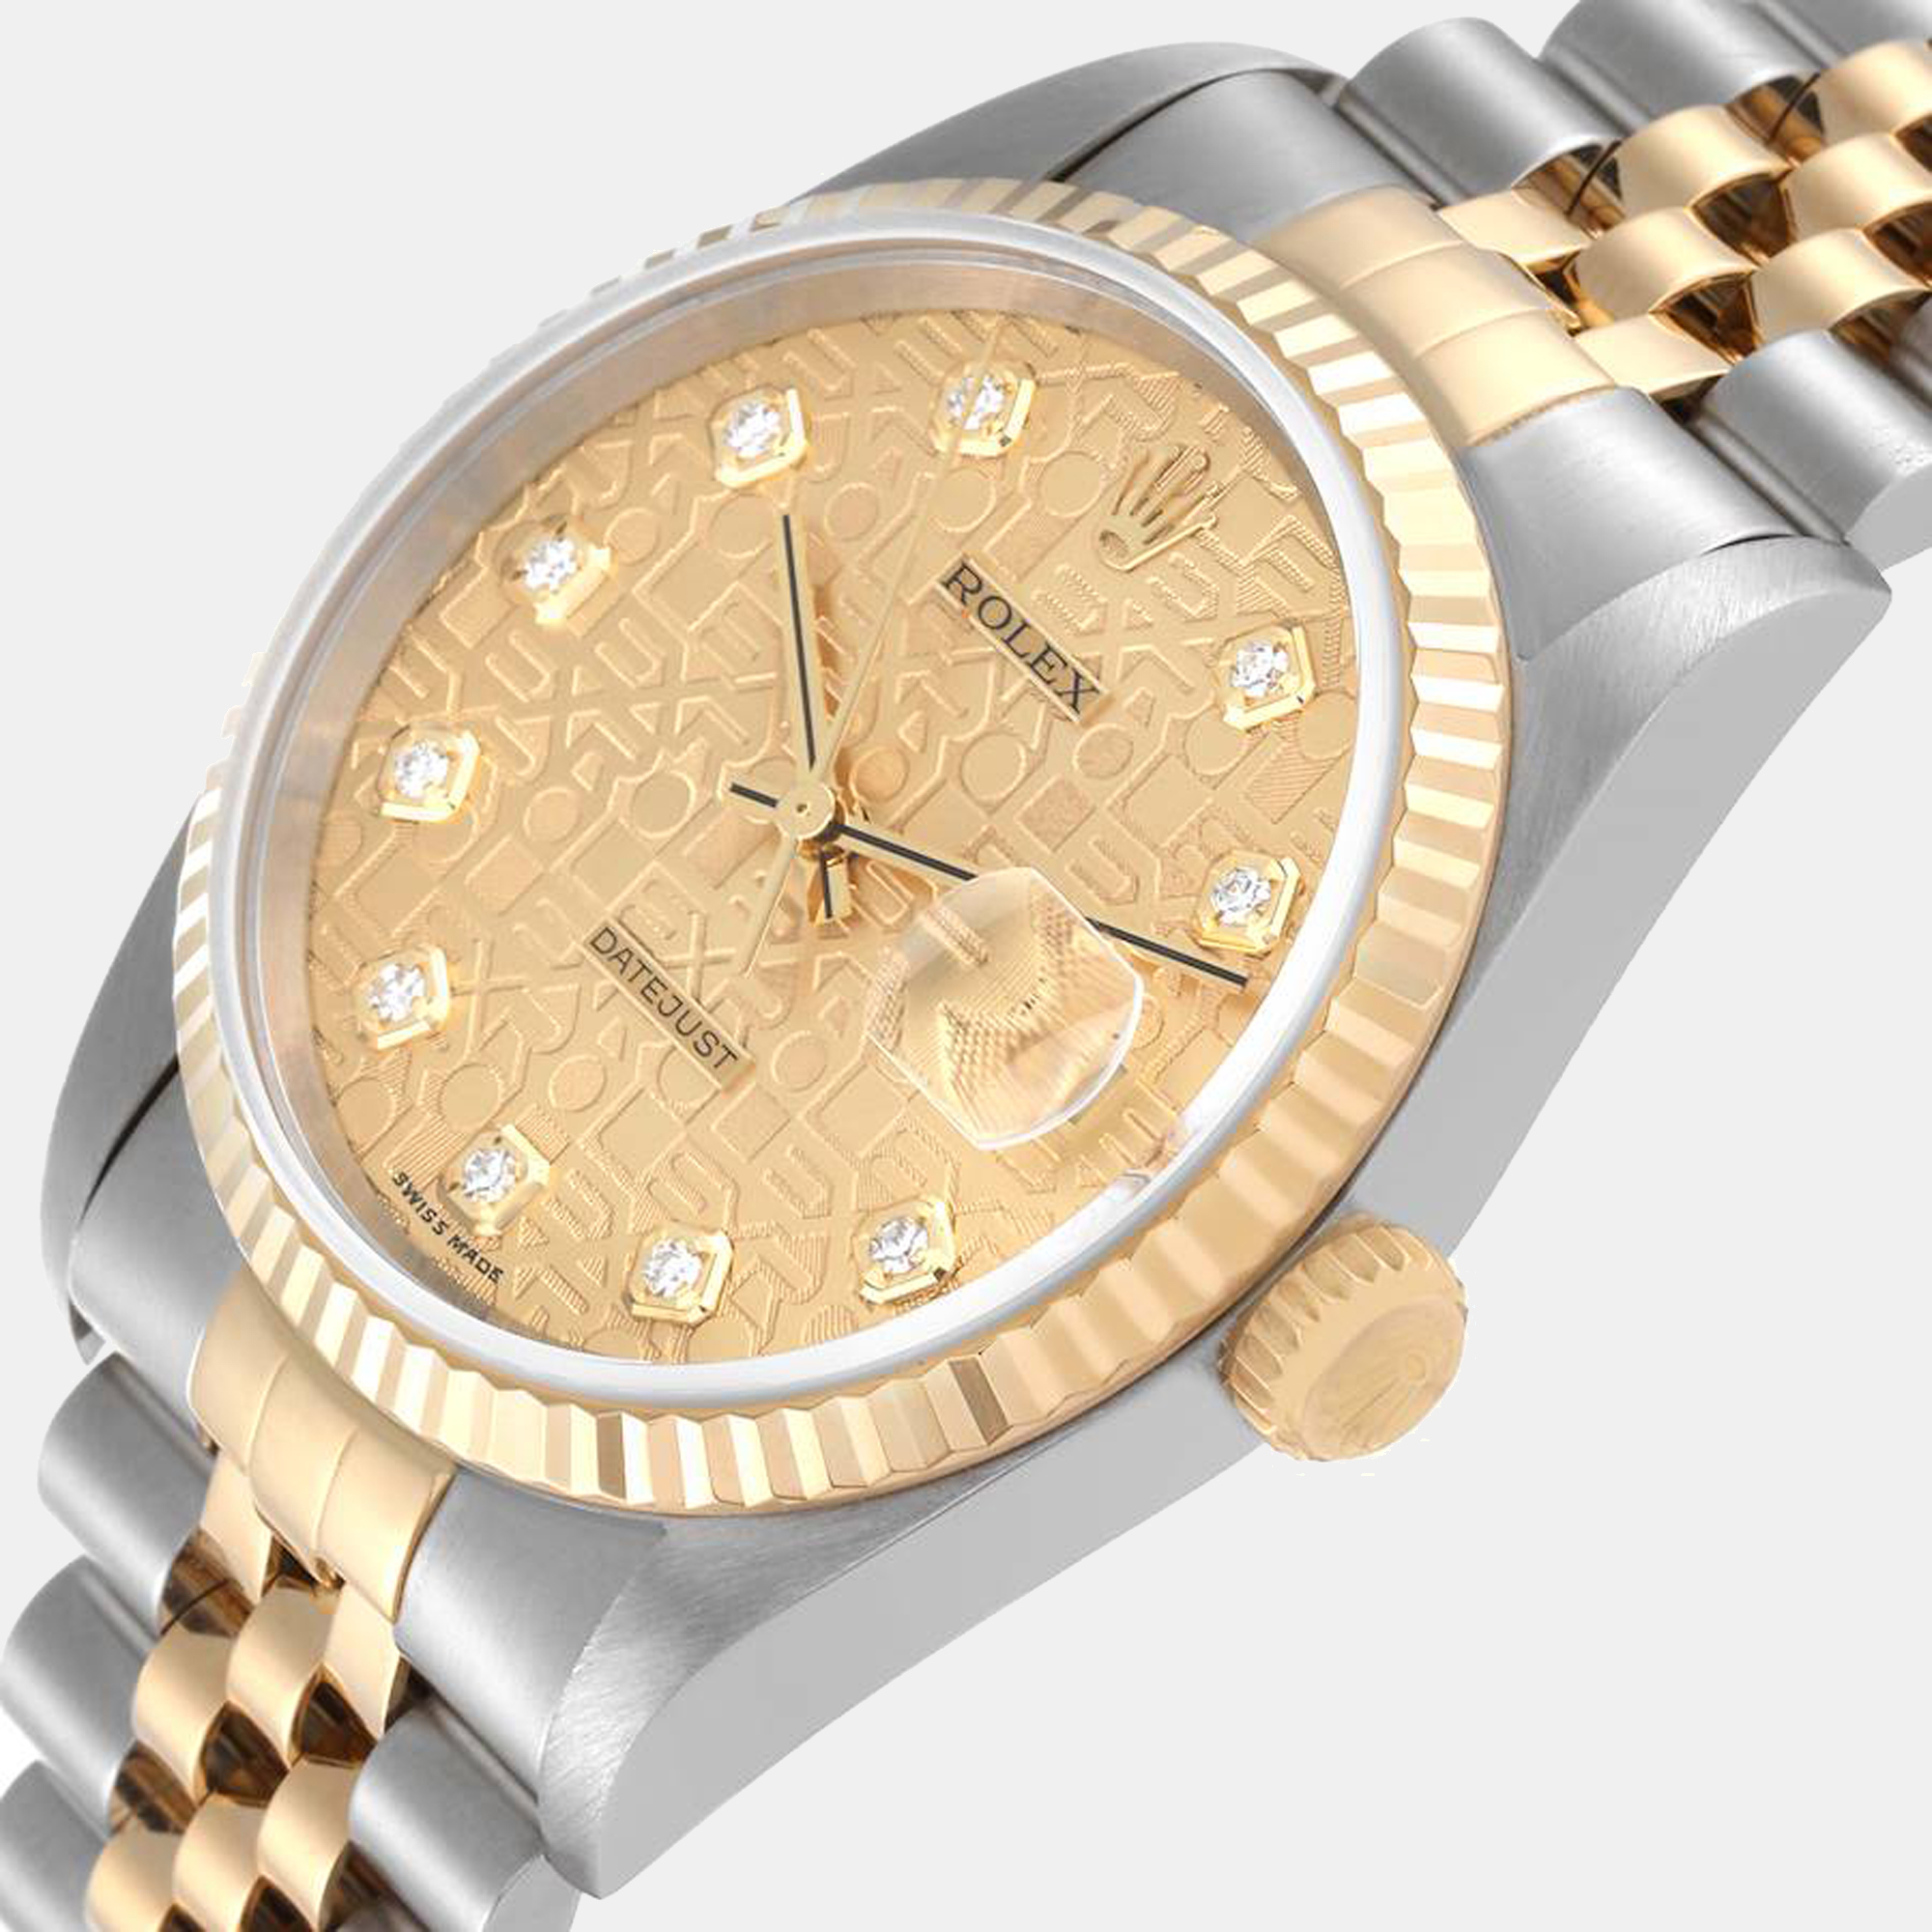 

Rolex Champagne Diamonds 18k Yellow Gold And Stainless Steel Datejust 16233 Men's Wristwatch 36 mm